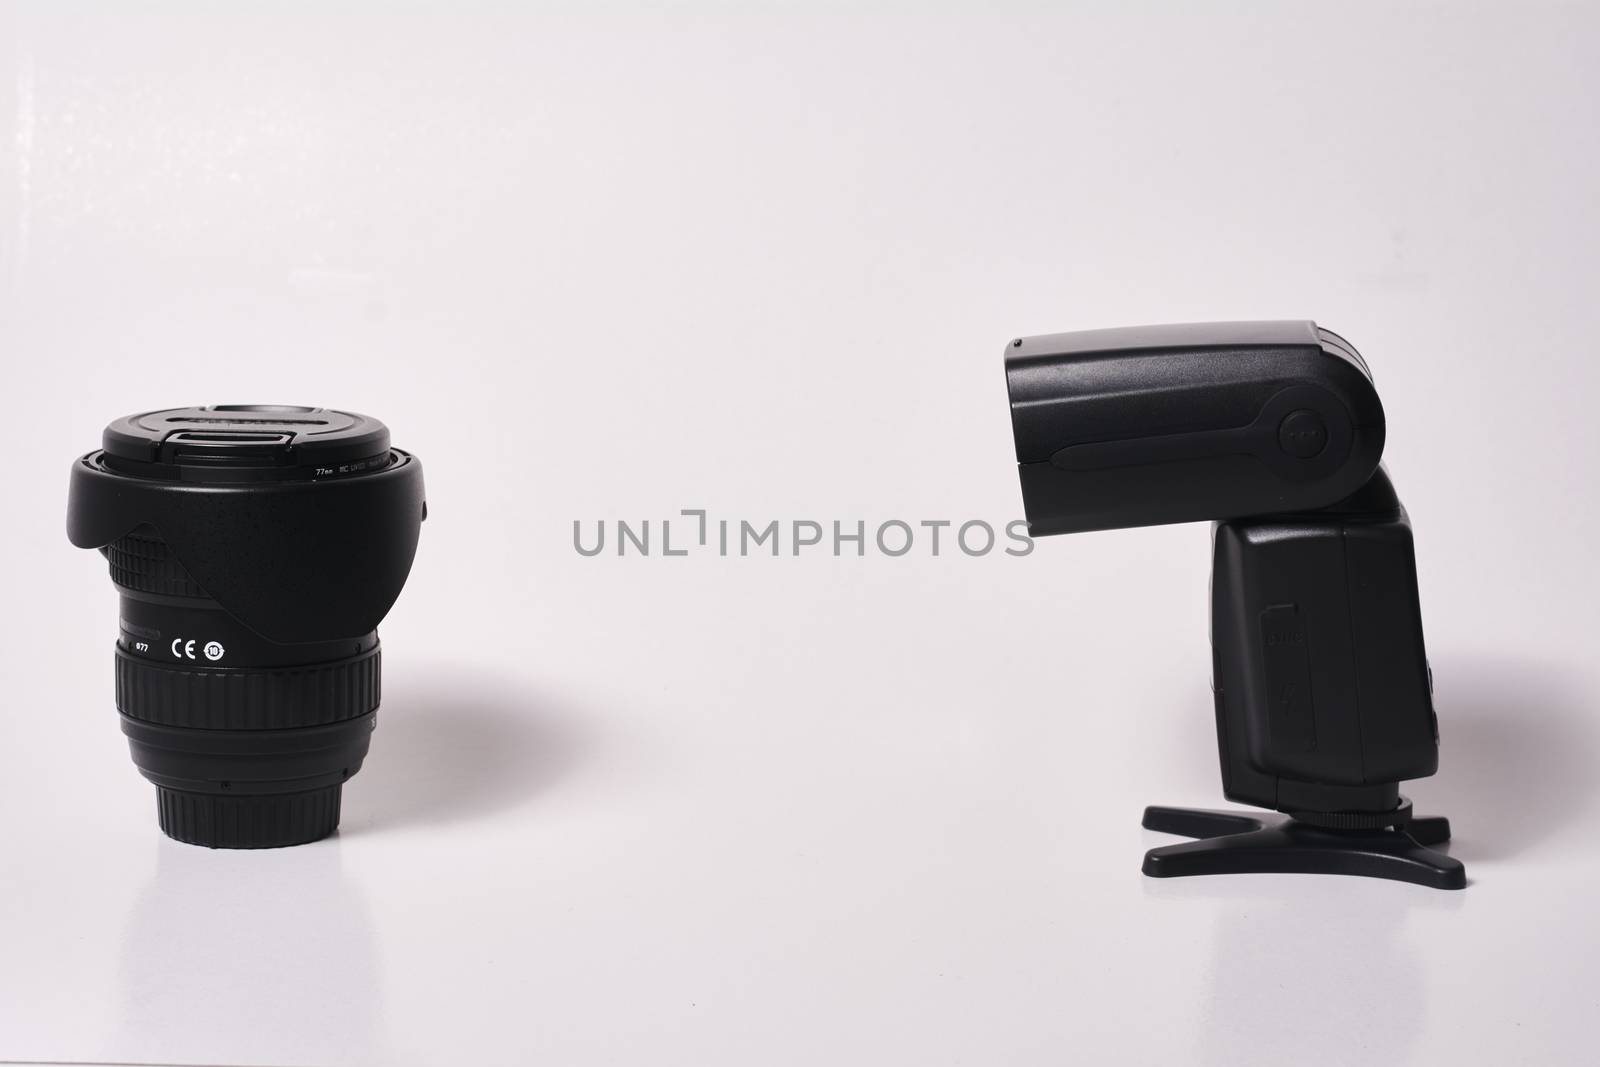 Set of photographic equipment, lens, flash, Love of photographic